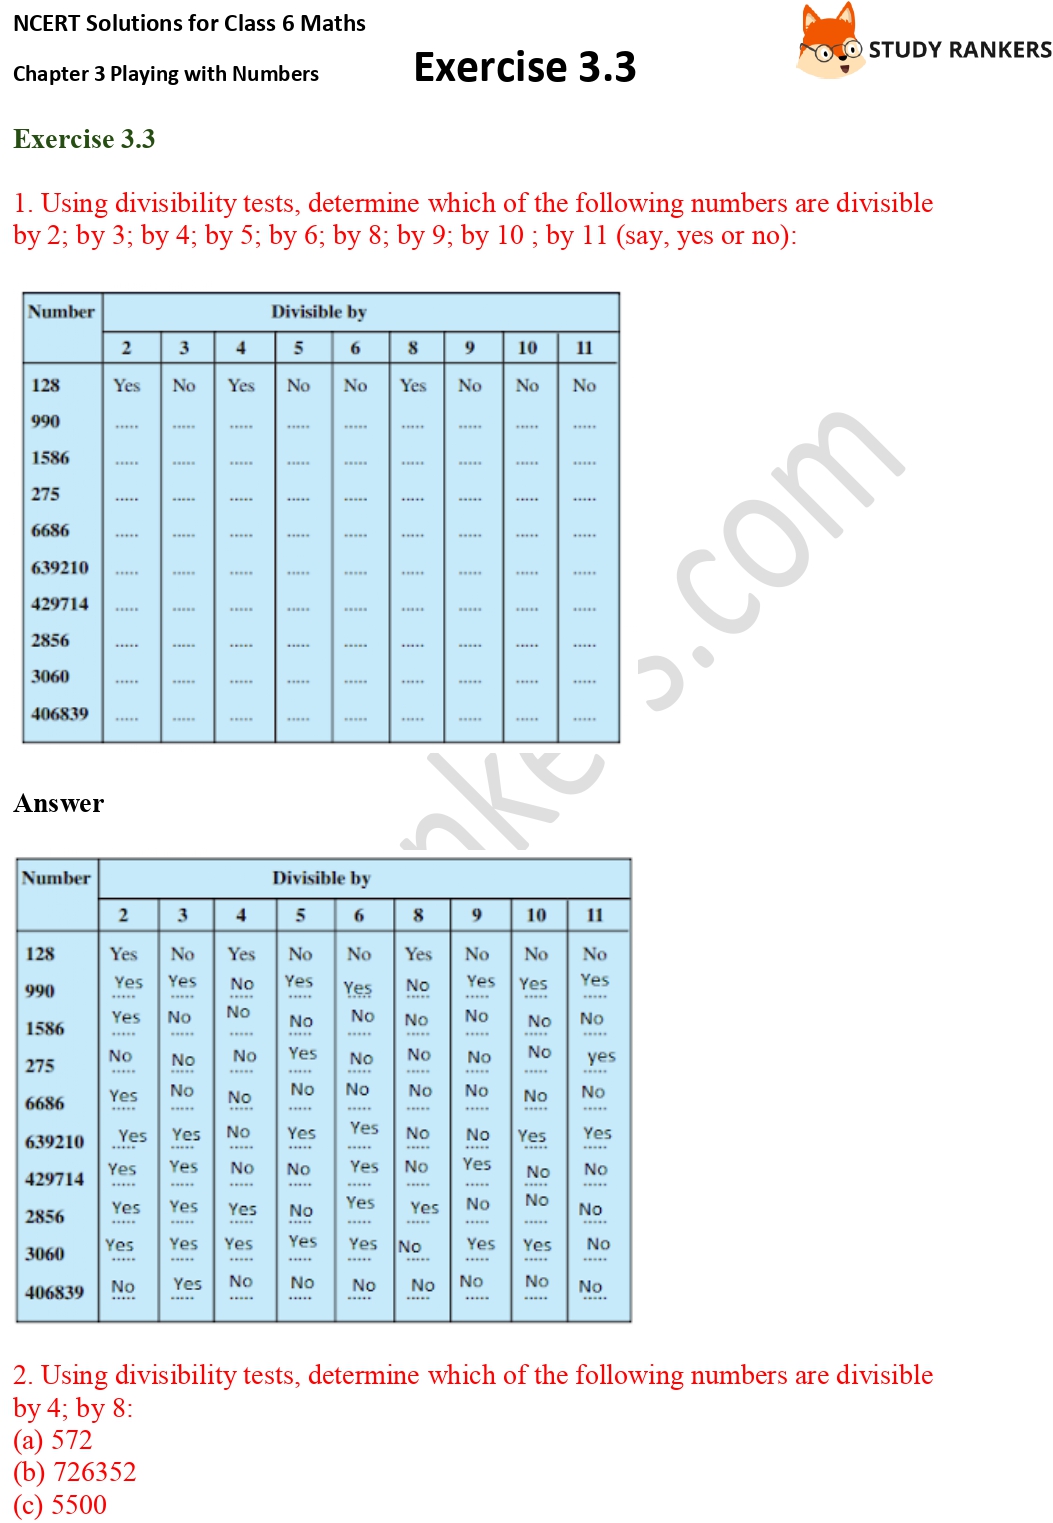 NCERT Solutions for Class 6 Maths Chapter 3 Playing with Numbers Exercise 3.3 Part 1